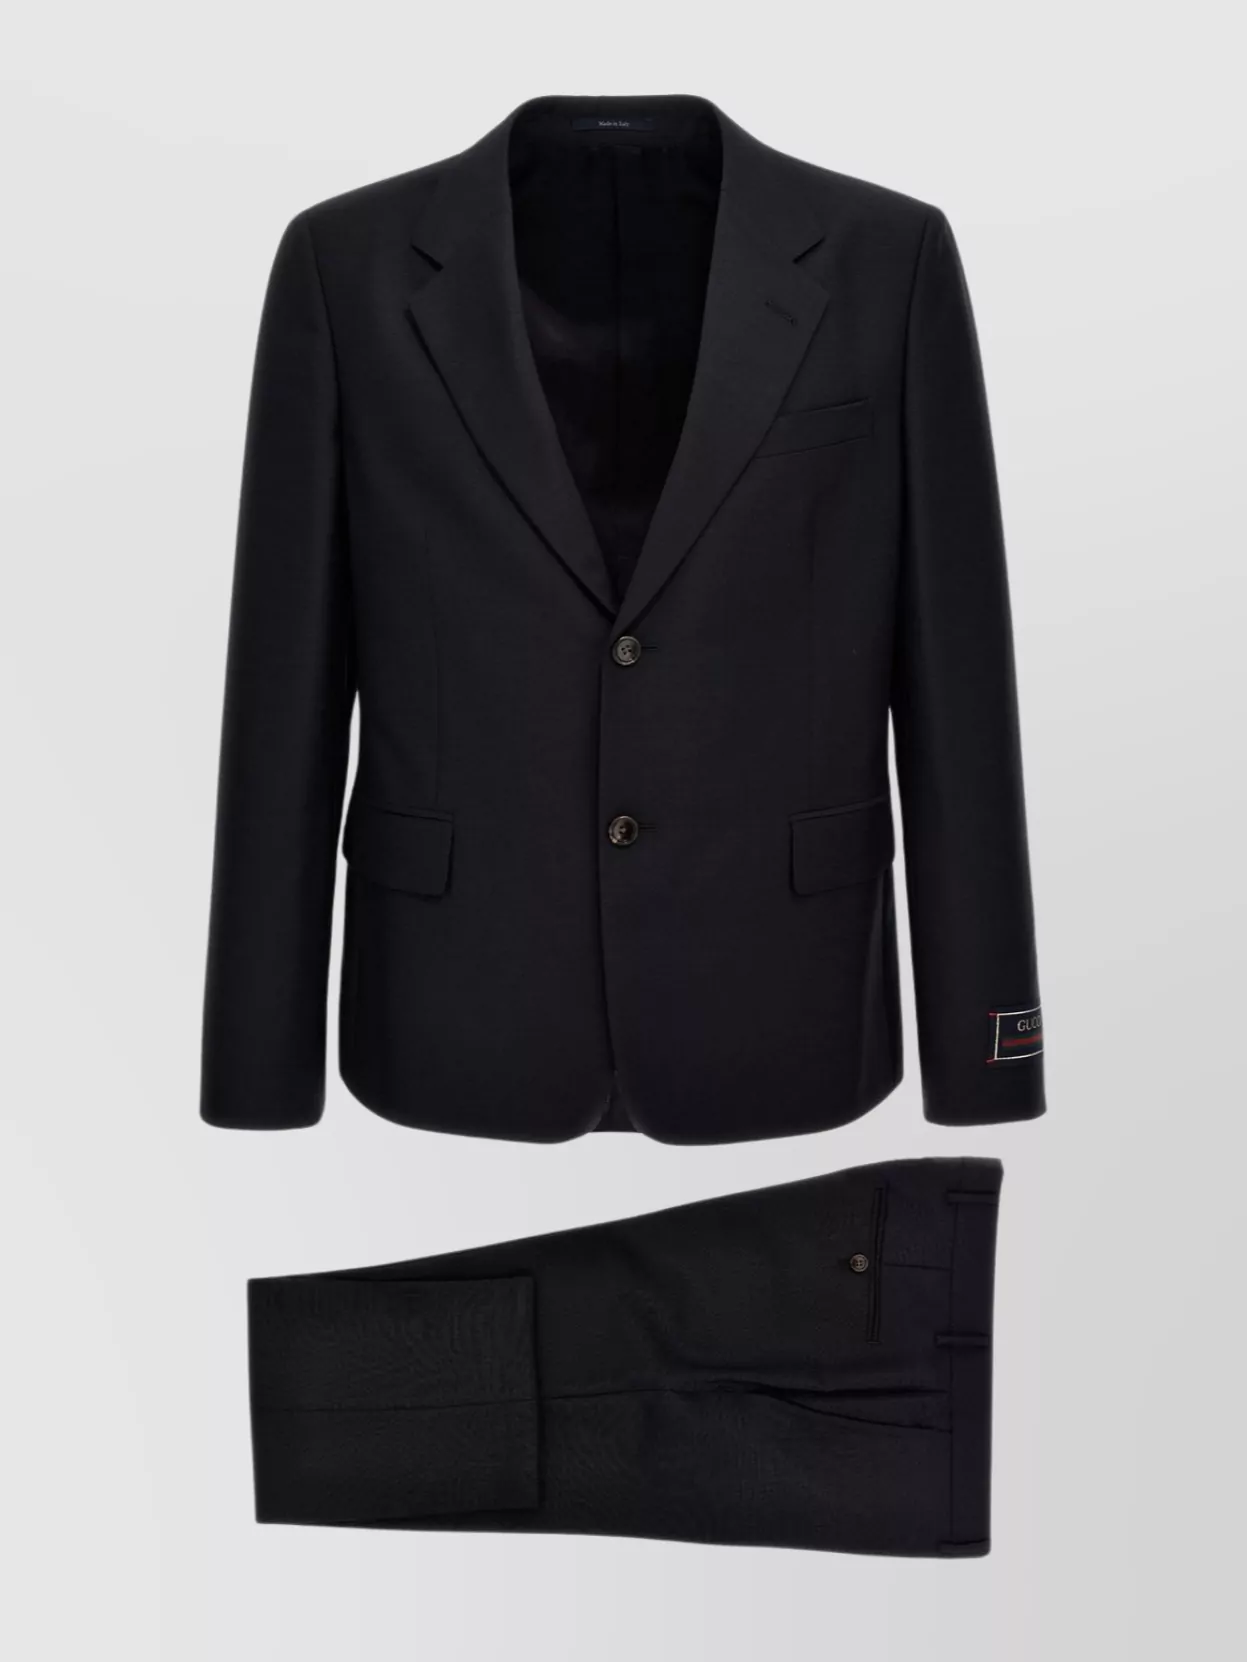 Gucci Mohair Suit Set Featuring Multiple Pockets In Black